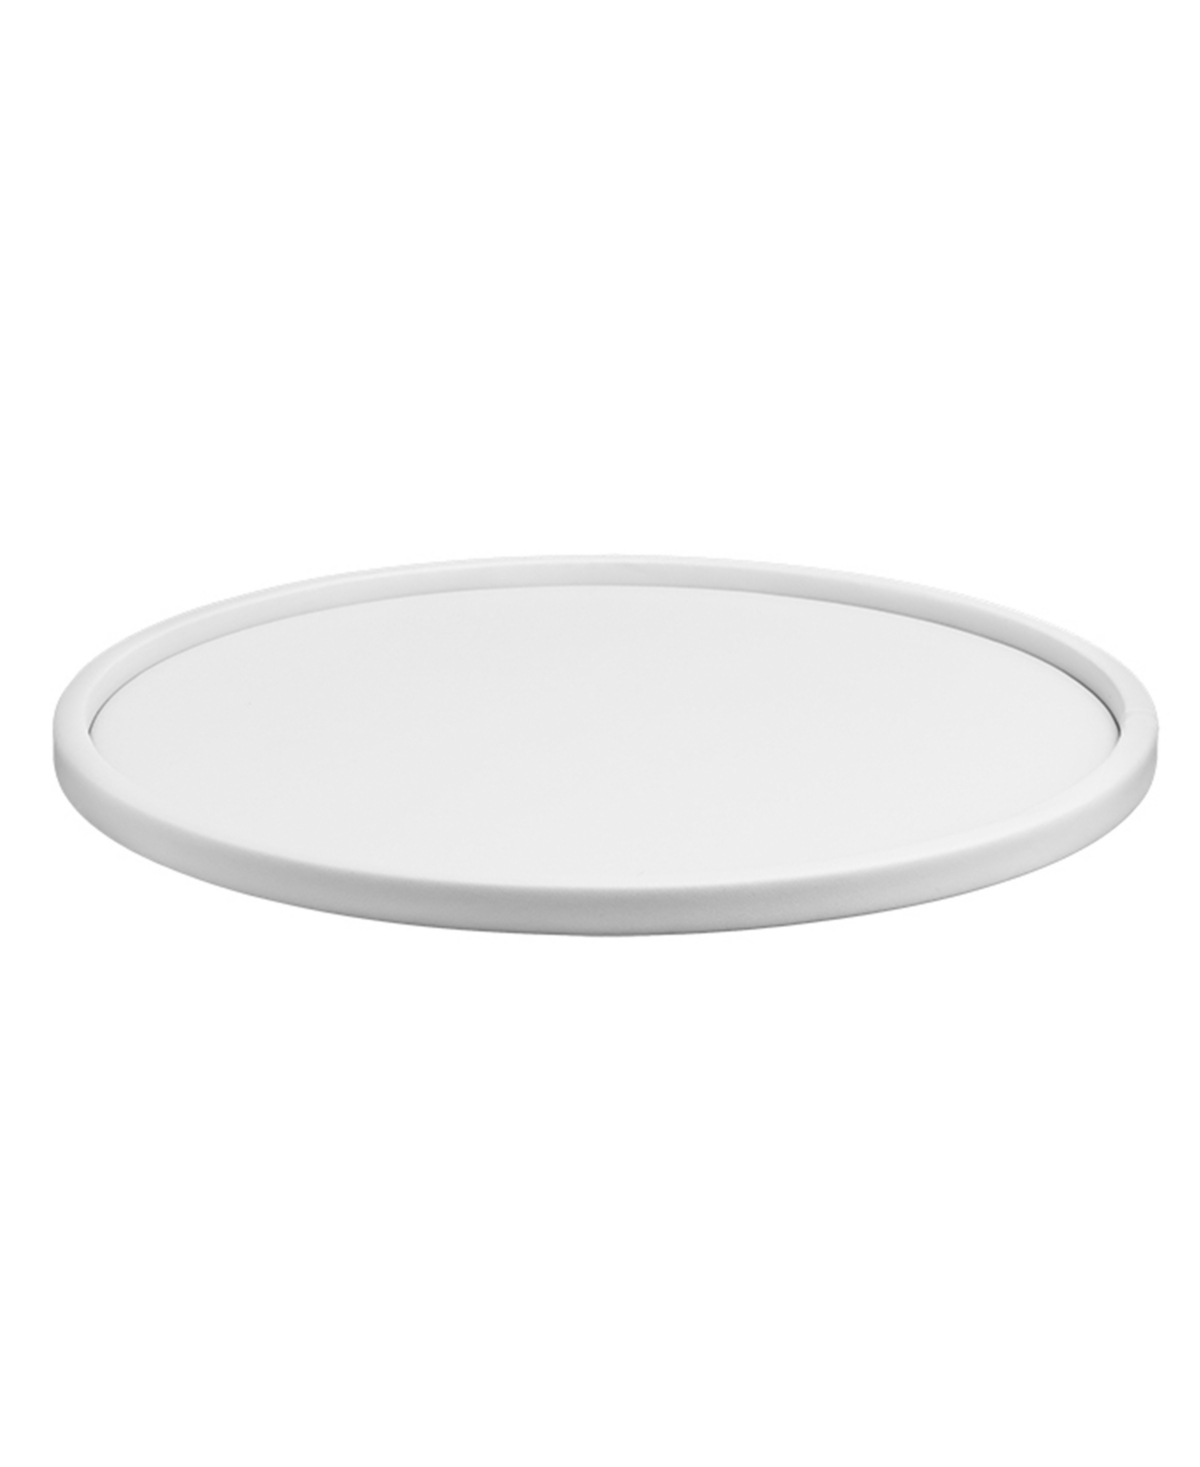 Contempo 14 Round Sidewall Serving Tray